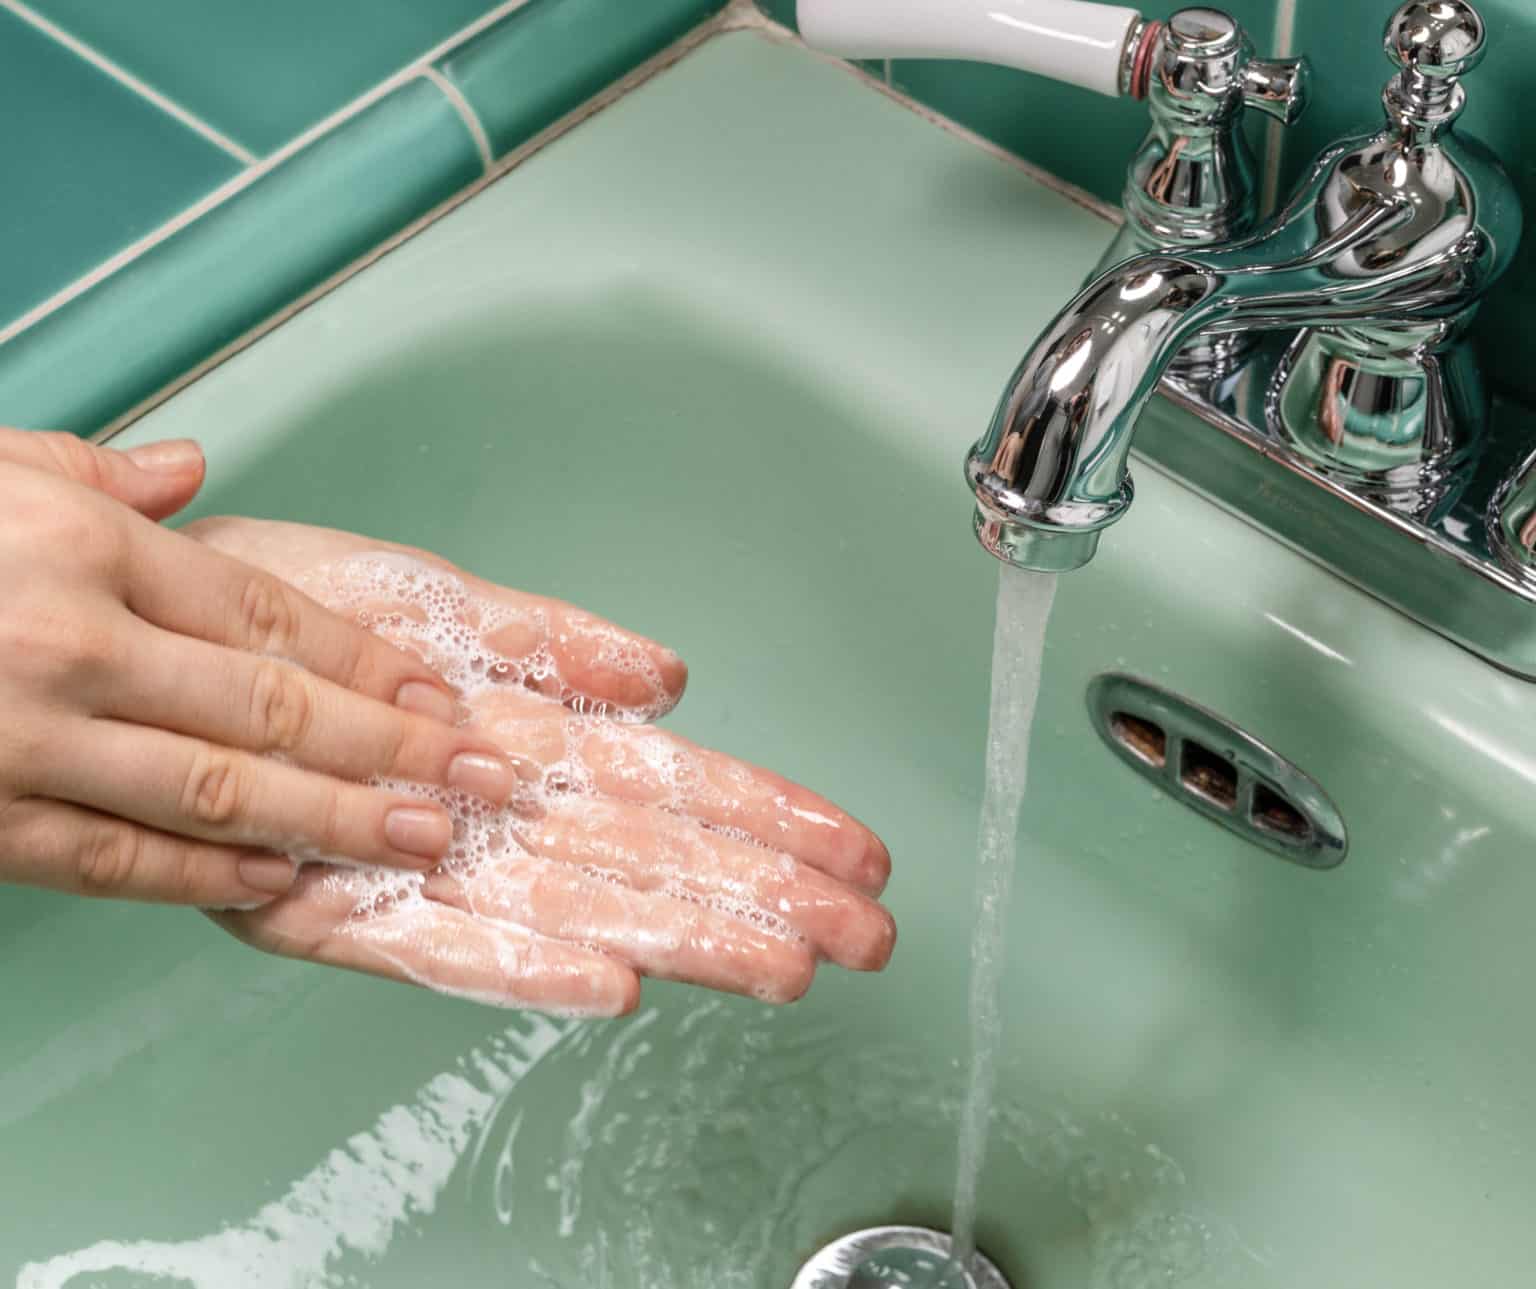 washing hands with soap in pastel green sink under running water